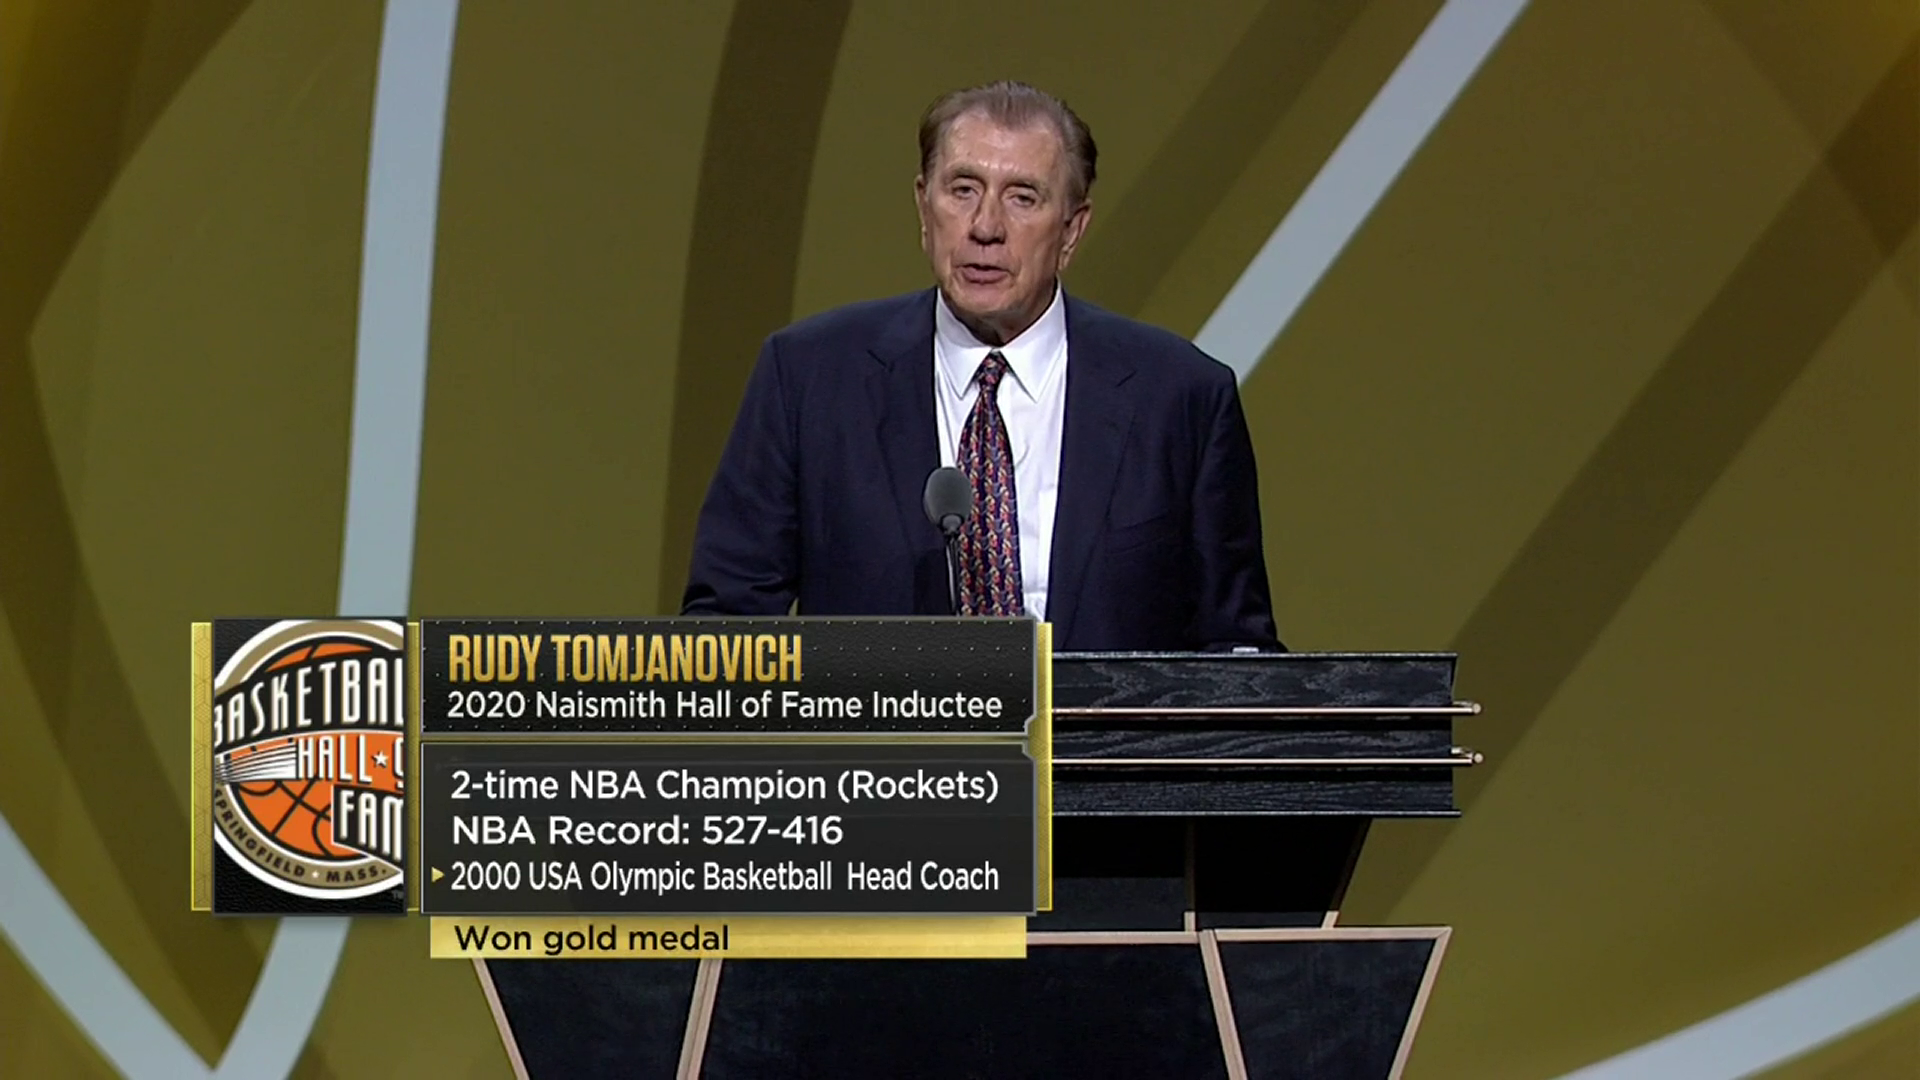 Hall of Famer: Top career moments for Rockets legend Rudy Tomjanovich